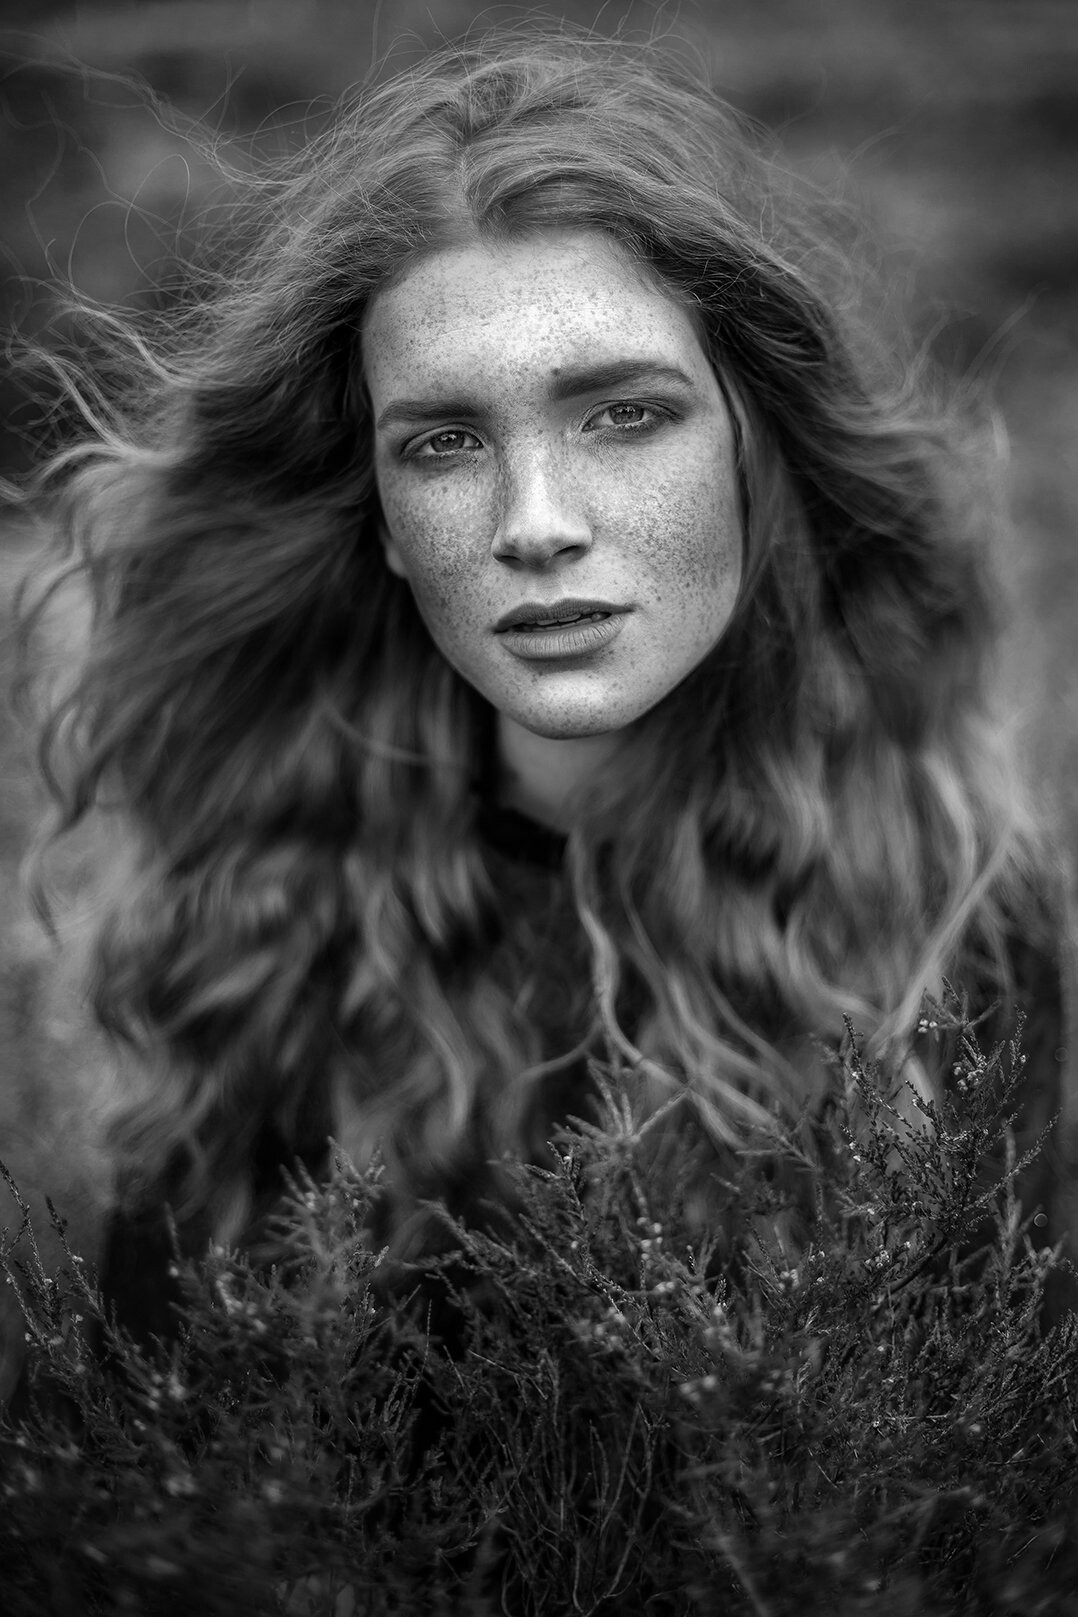 In this picture i wanted to show that was taken in heath. The beautiful hair of the model blends into branches of the shrubs. And with this beautiful model and the many freckles gives the picture a naturally look.